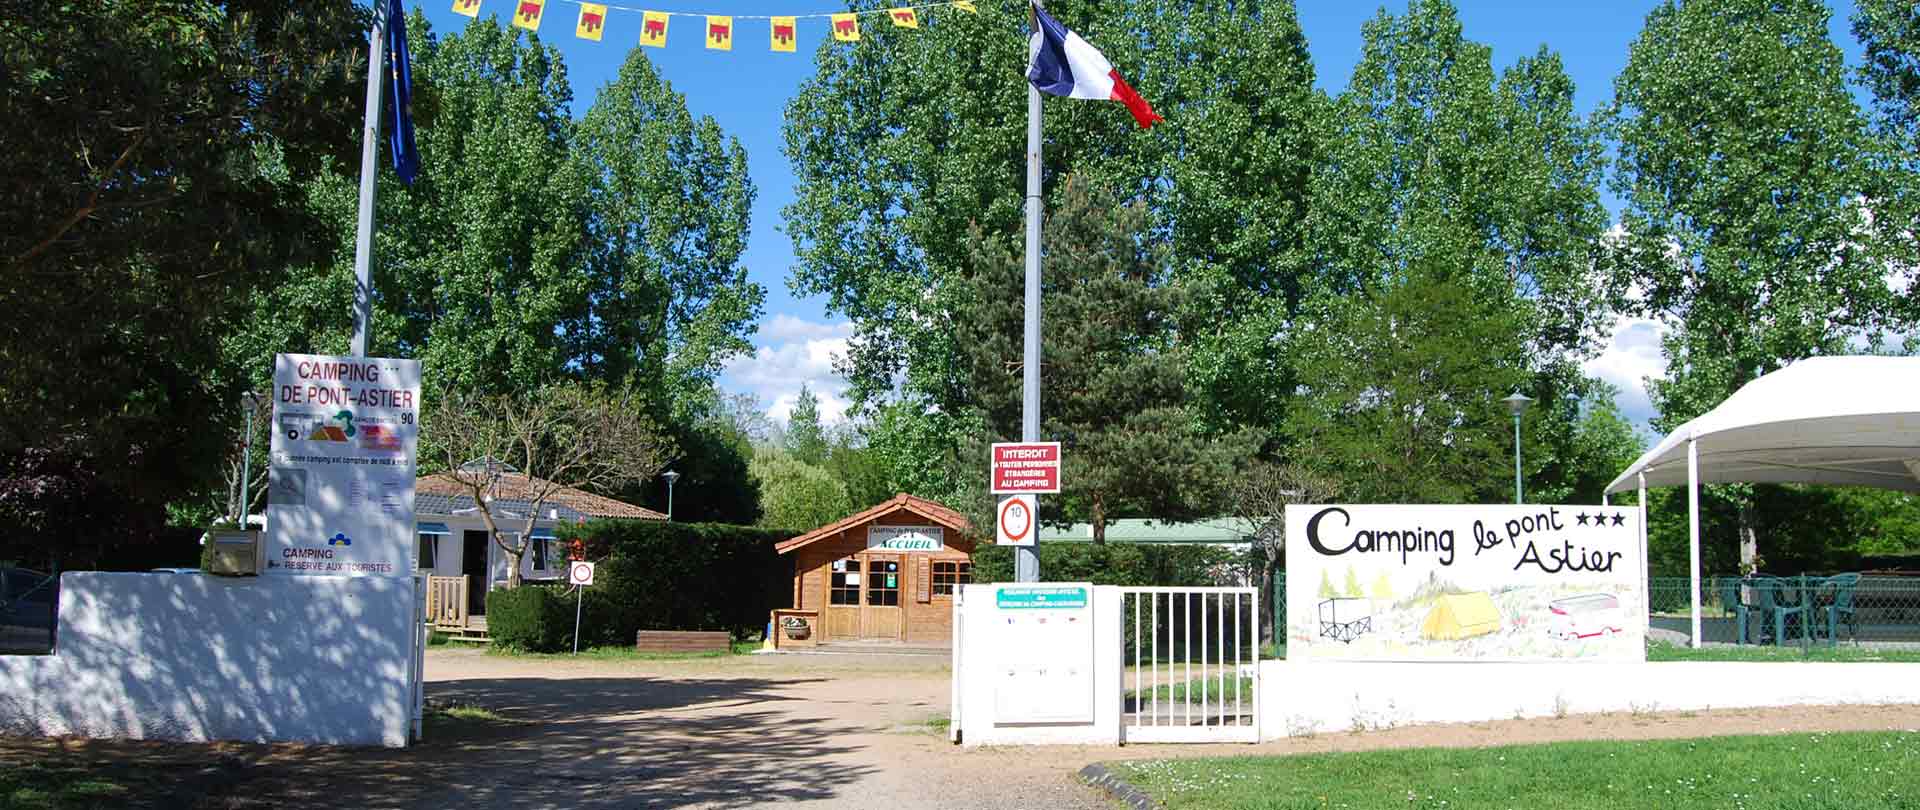 entree camping le pont astier